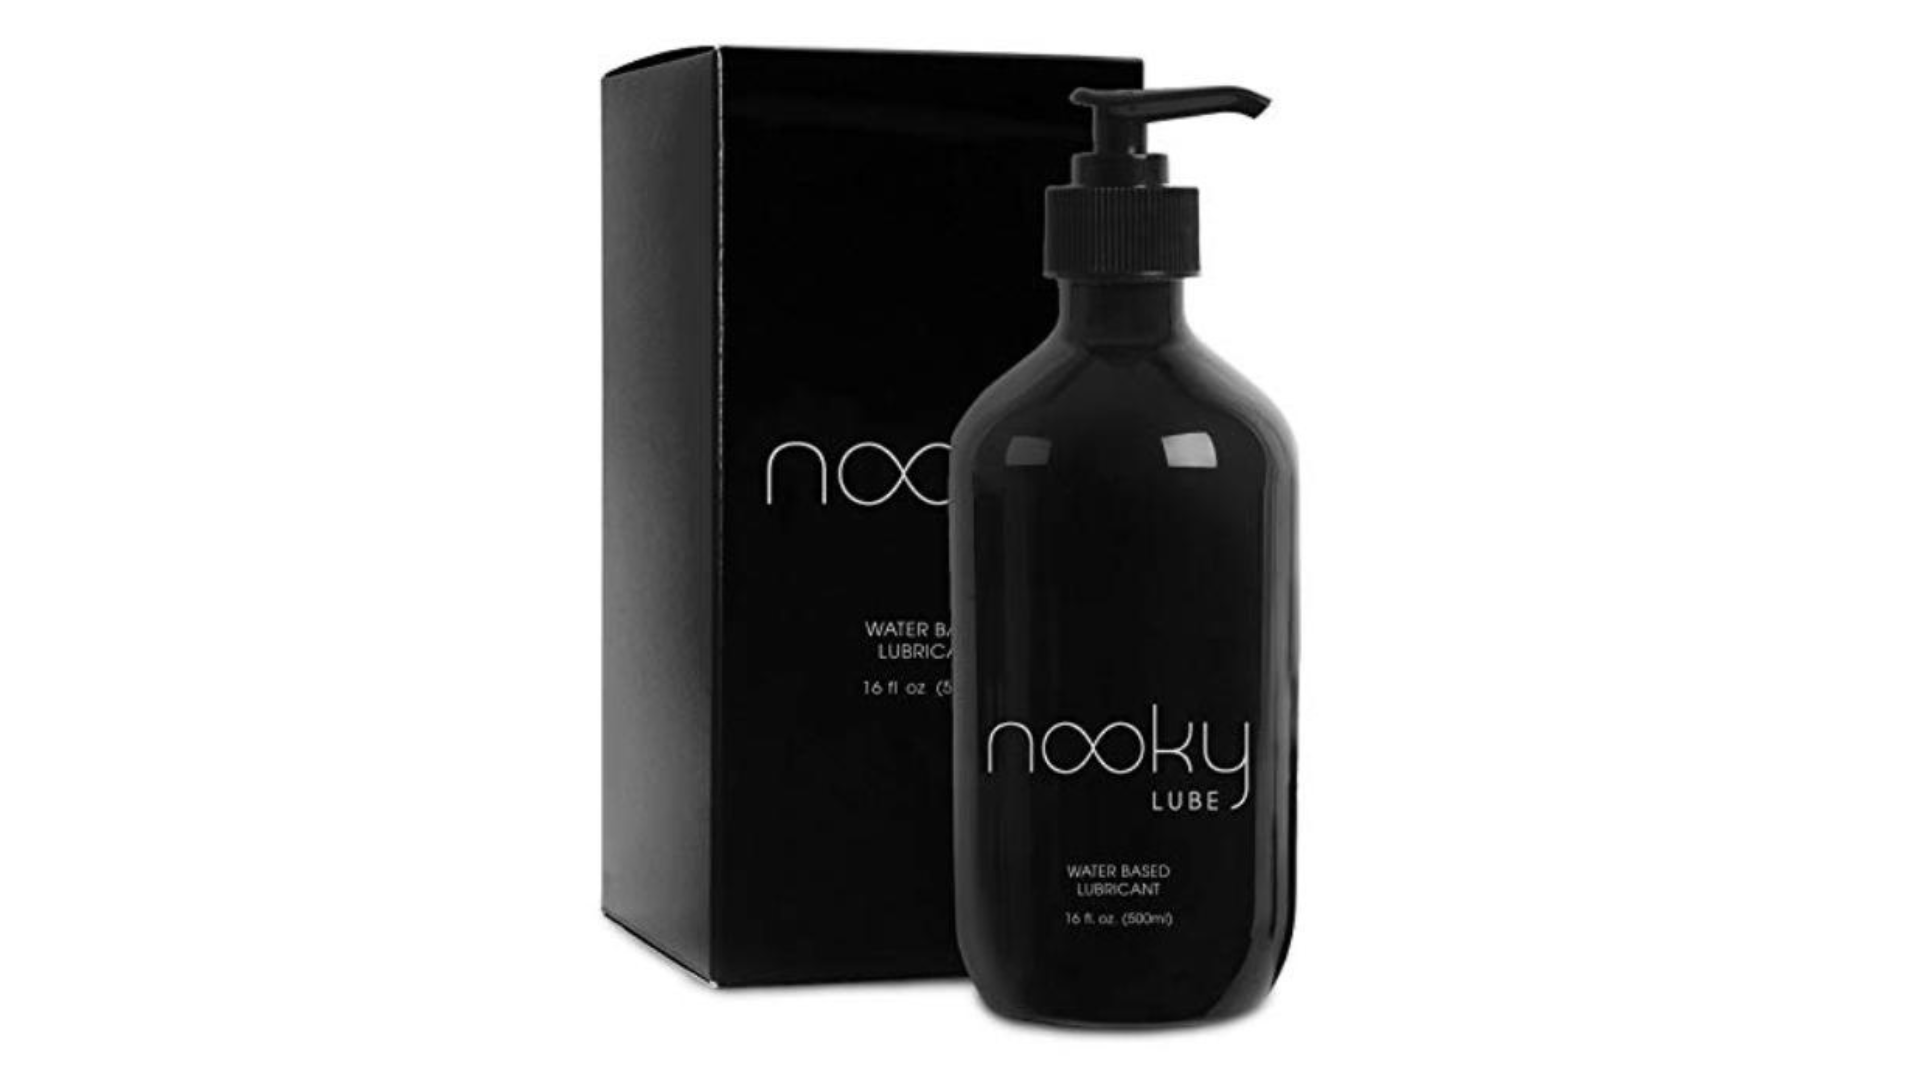 Nooky Lube black bottle with box